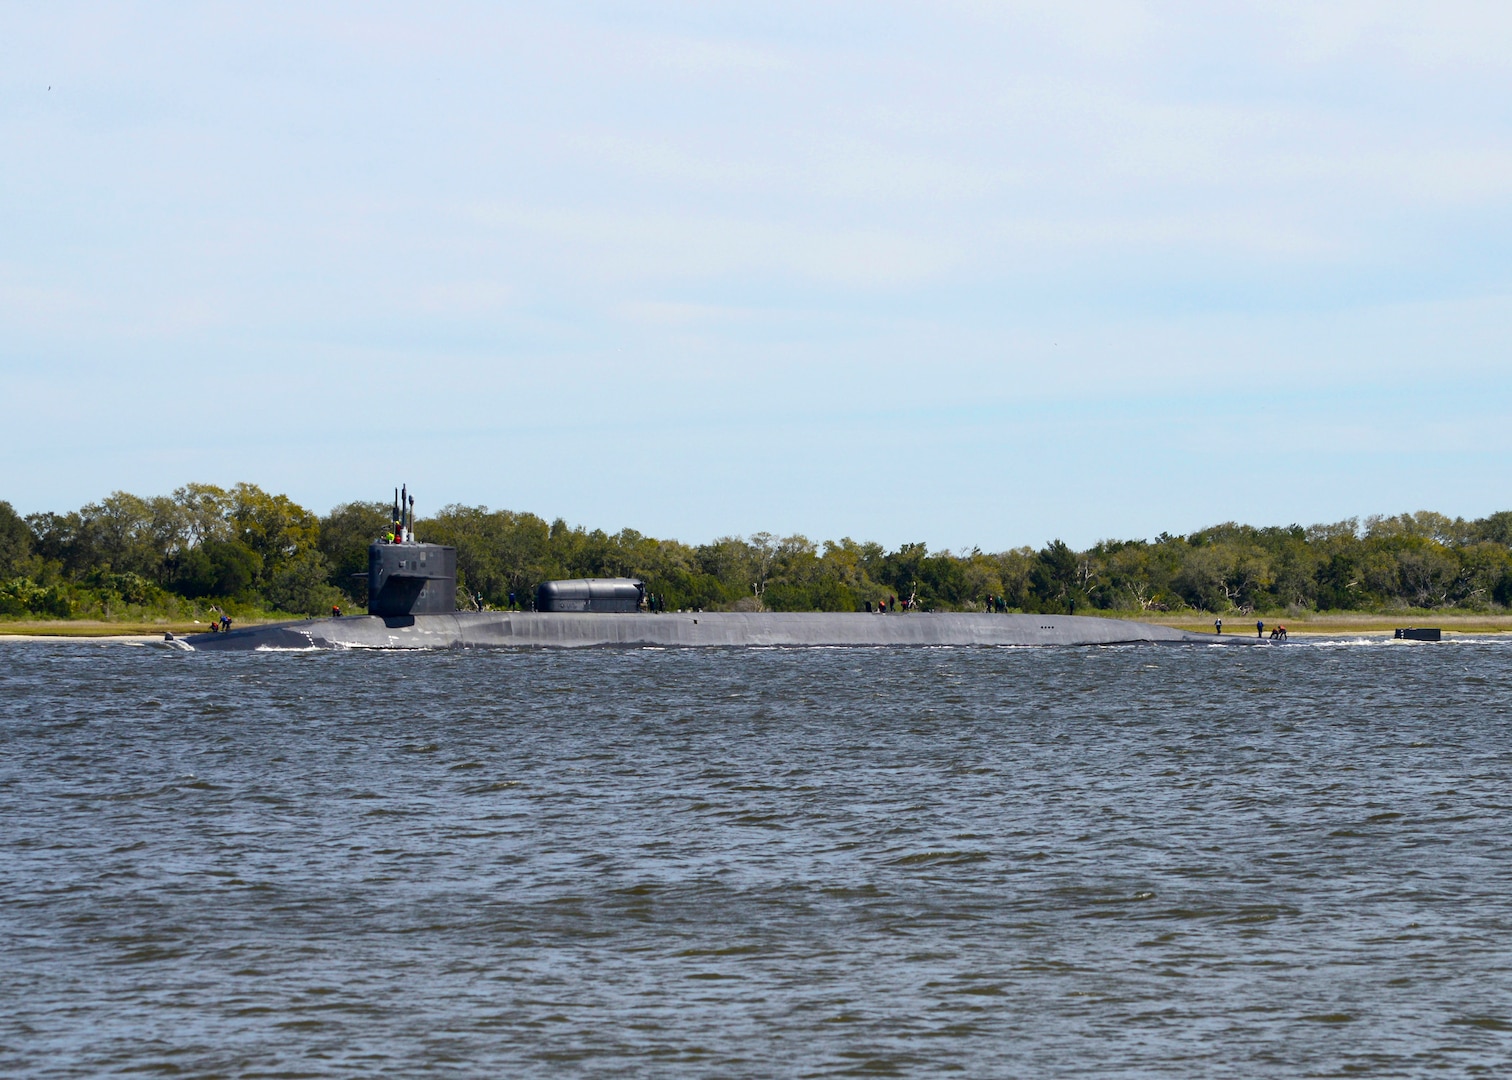 The Ohio-class guided-missile submarine USS Georgia (SSGN 729)(Gold) returns to its homeport at Naval Submarine Base Kings Bay, Ga. Ohio-class guided-missile submarines are capable of carrying up to 154 tomahawk land-attack cruise missiles. The base is home to all East Coast Ohio-Class submarines.